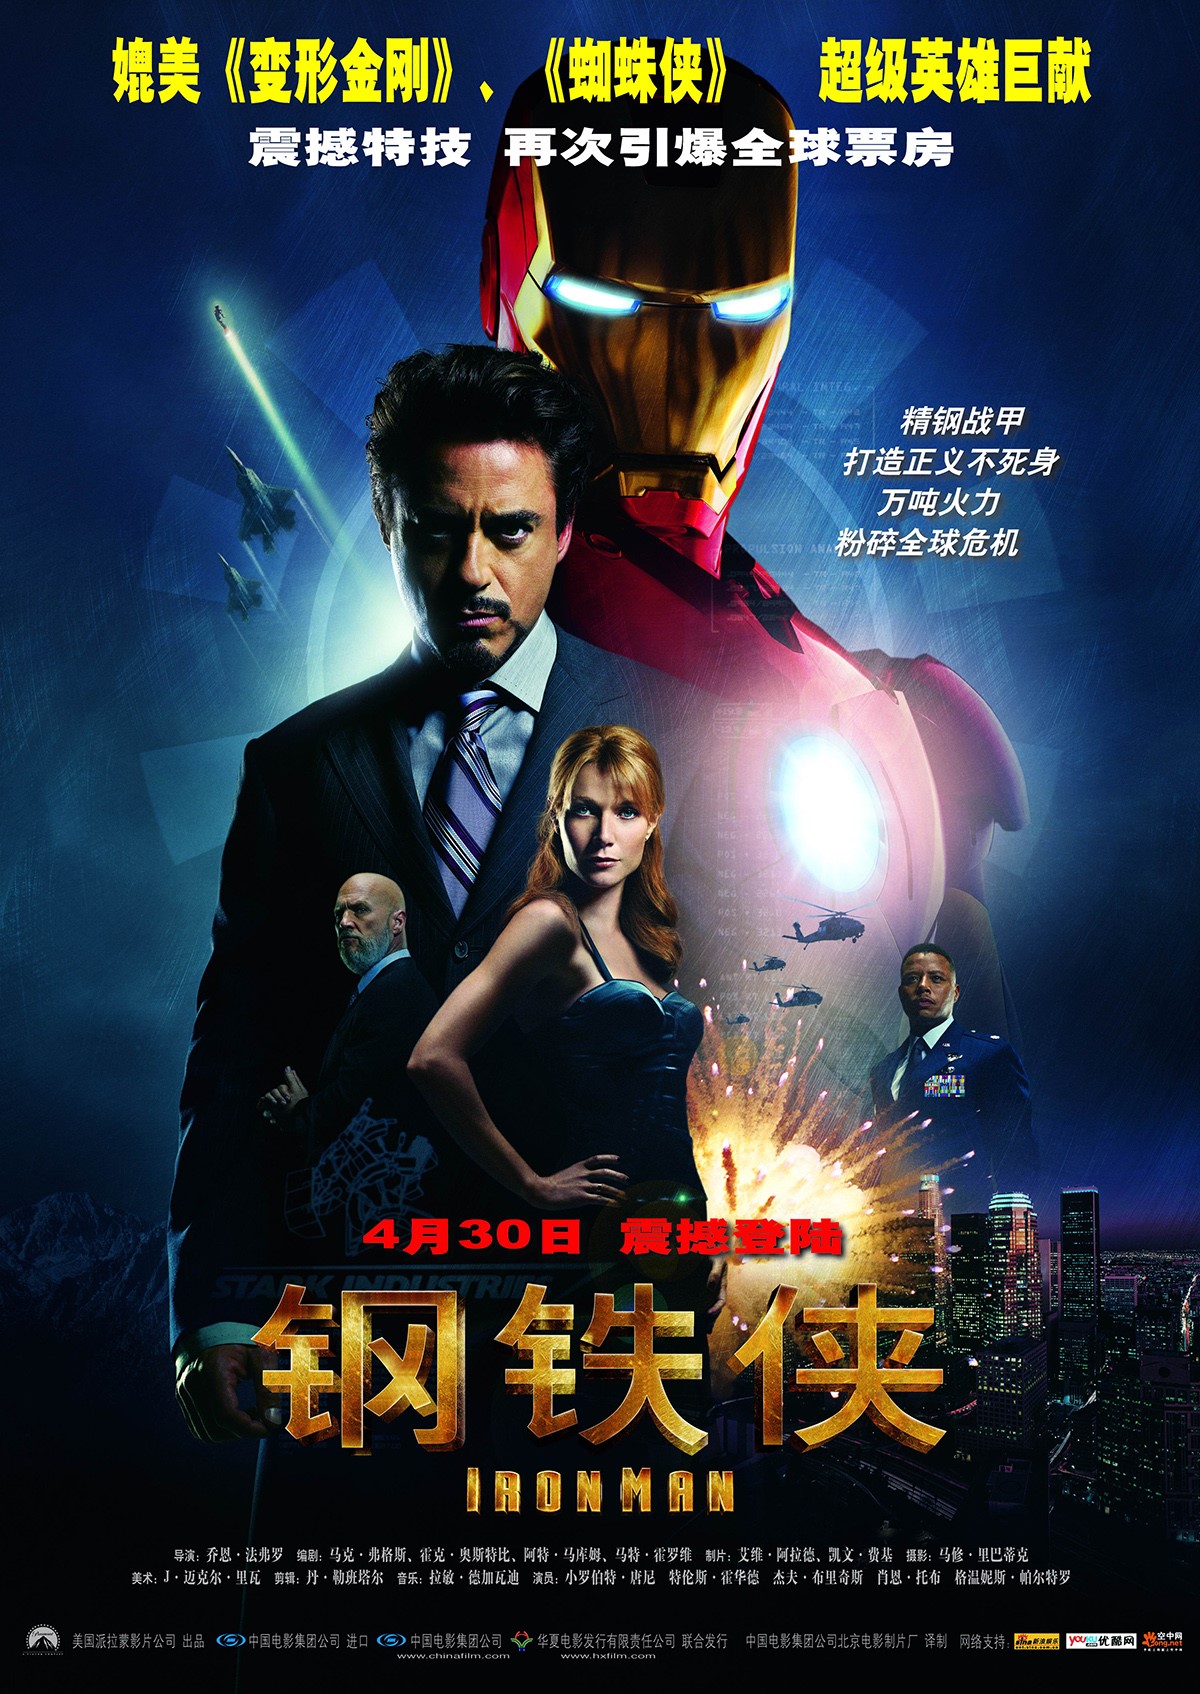 Iron Man, an excellent mainstream entertainment movie. Its importance lies in establishing the benchmark art style for a series of films from Marvel over the next decade or so.